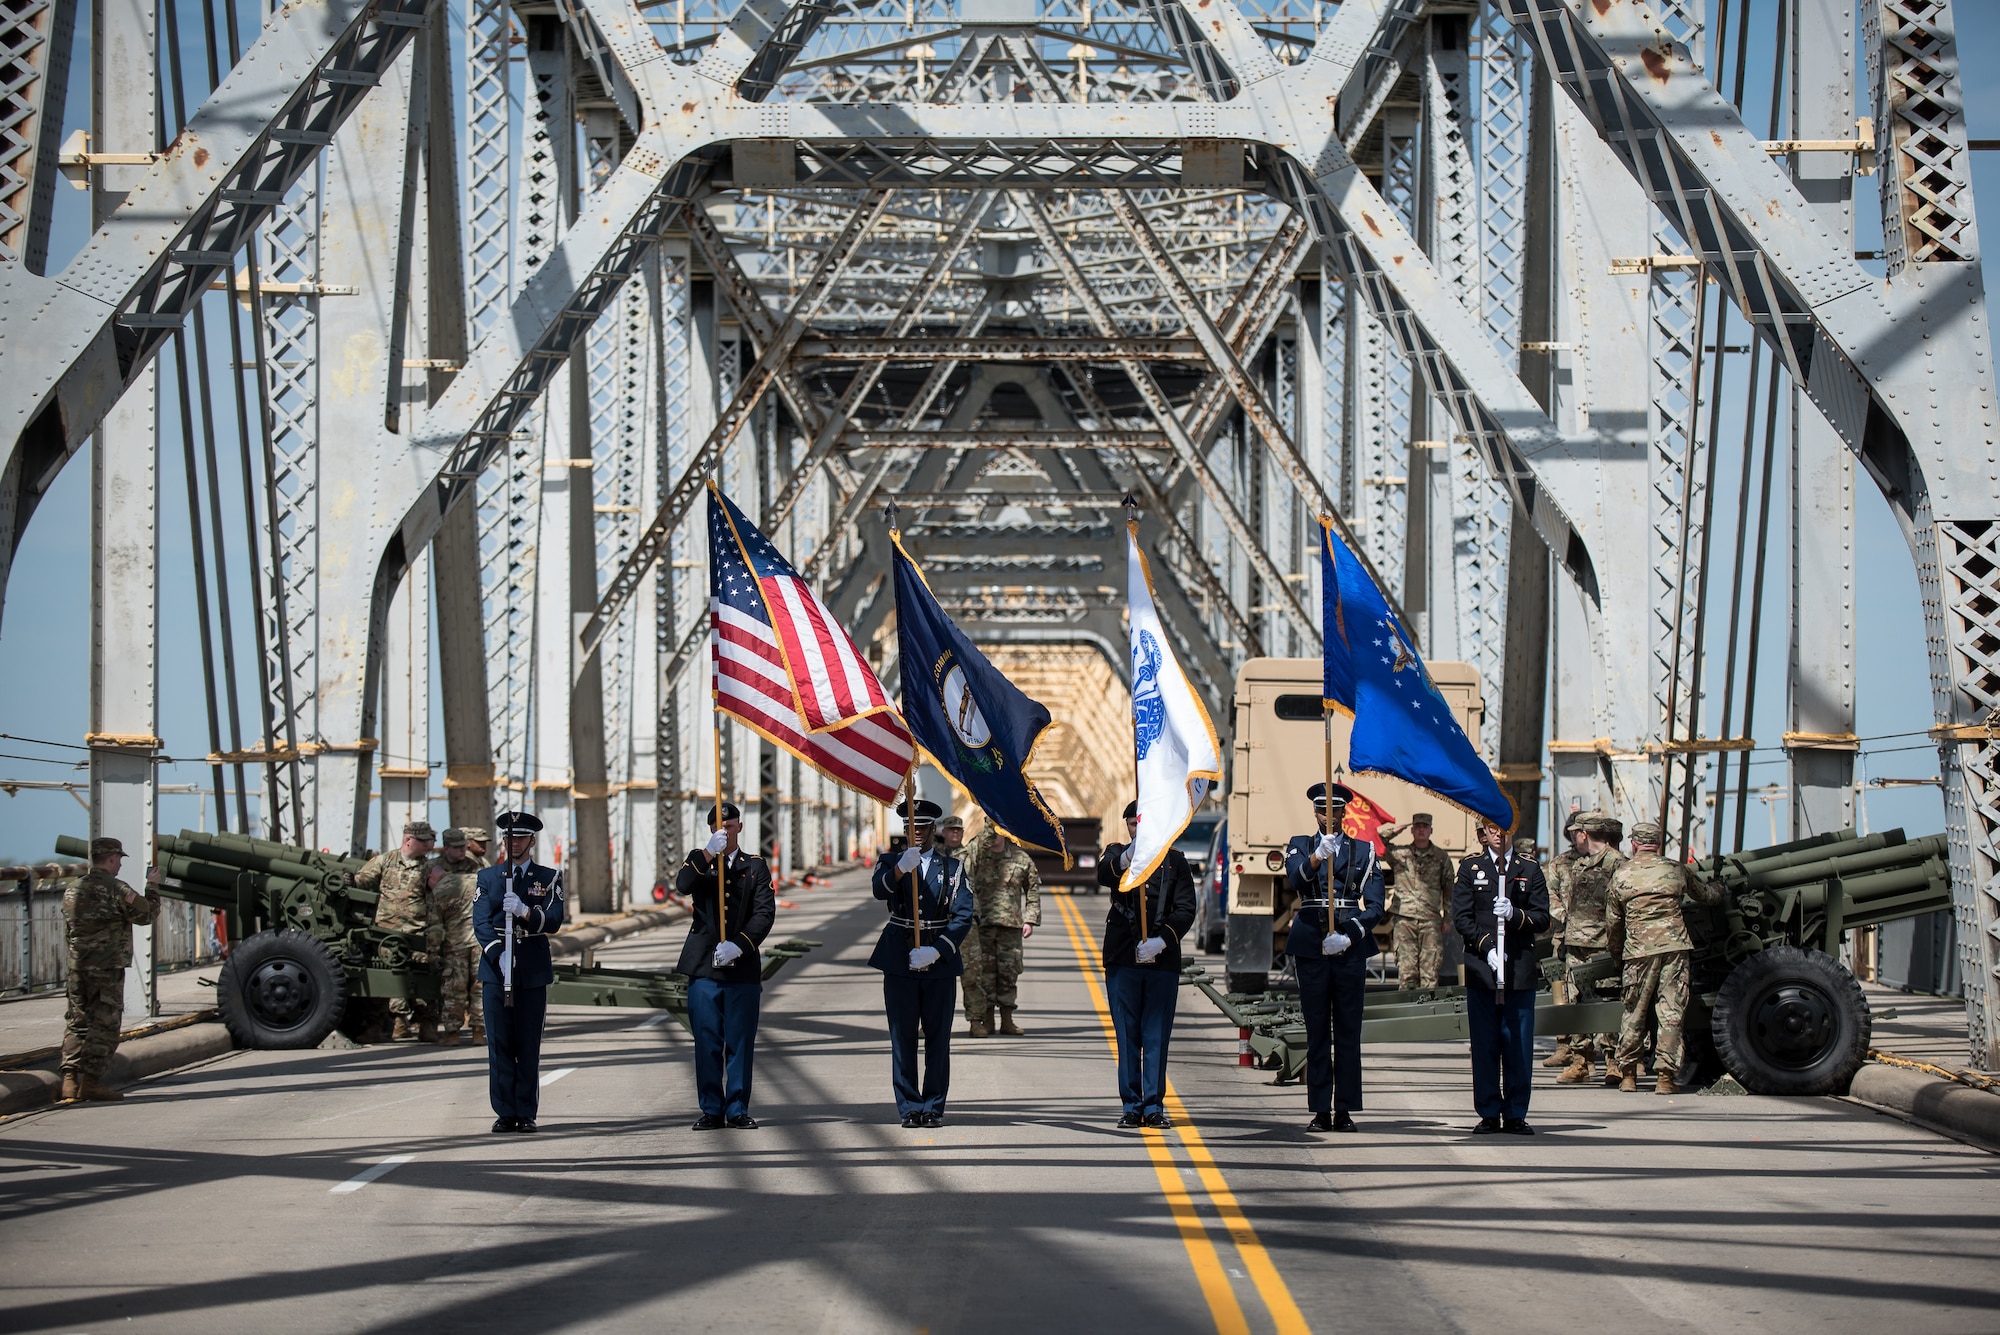 A joint color guard from the Kentucky Army and Air National Guard presents the colors to kick off the Thunder Over Louisville air show in downtown Louisville, Ky., April 13, 2019, as the Kentucky Guard's 138th Field Artillery Brigade stands buy to add cannon fire to the Star Spangled Banner. The annual event, which featured more than two dozen military aircraft, has grown to become one of the largest single-day air shows in North America. (U.S. Air National Guard photo by Dale Greer)